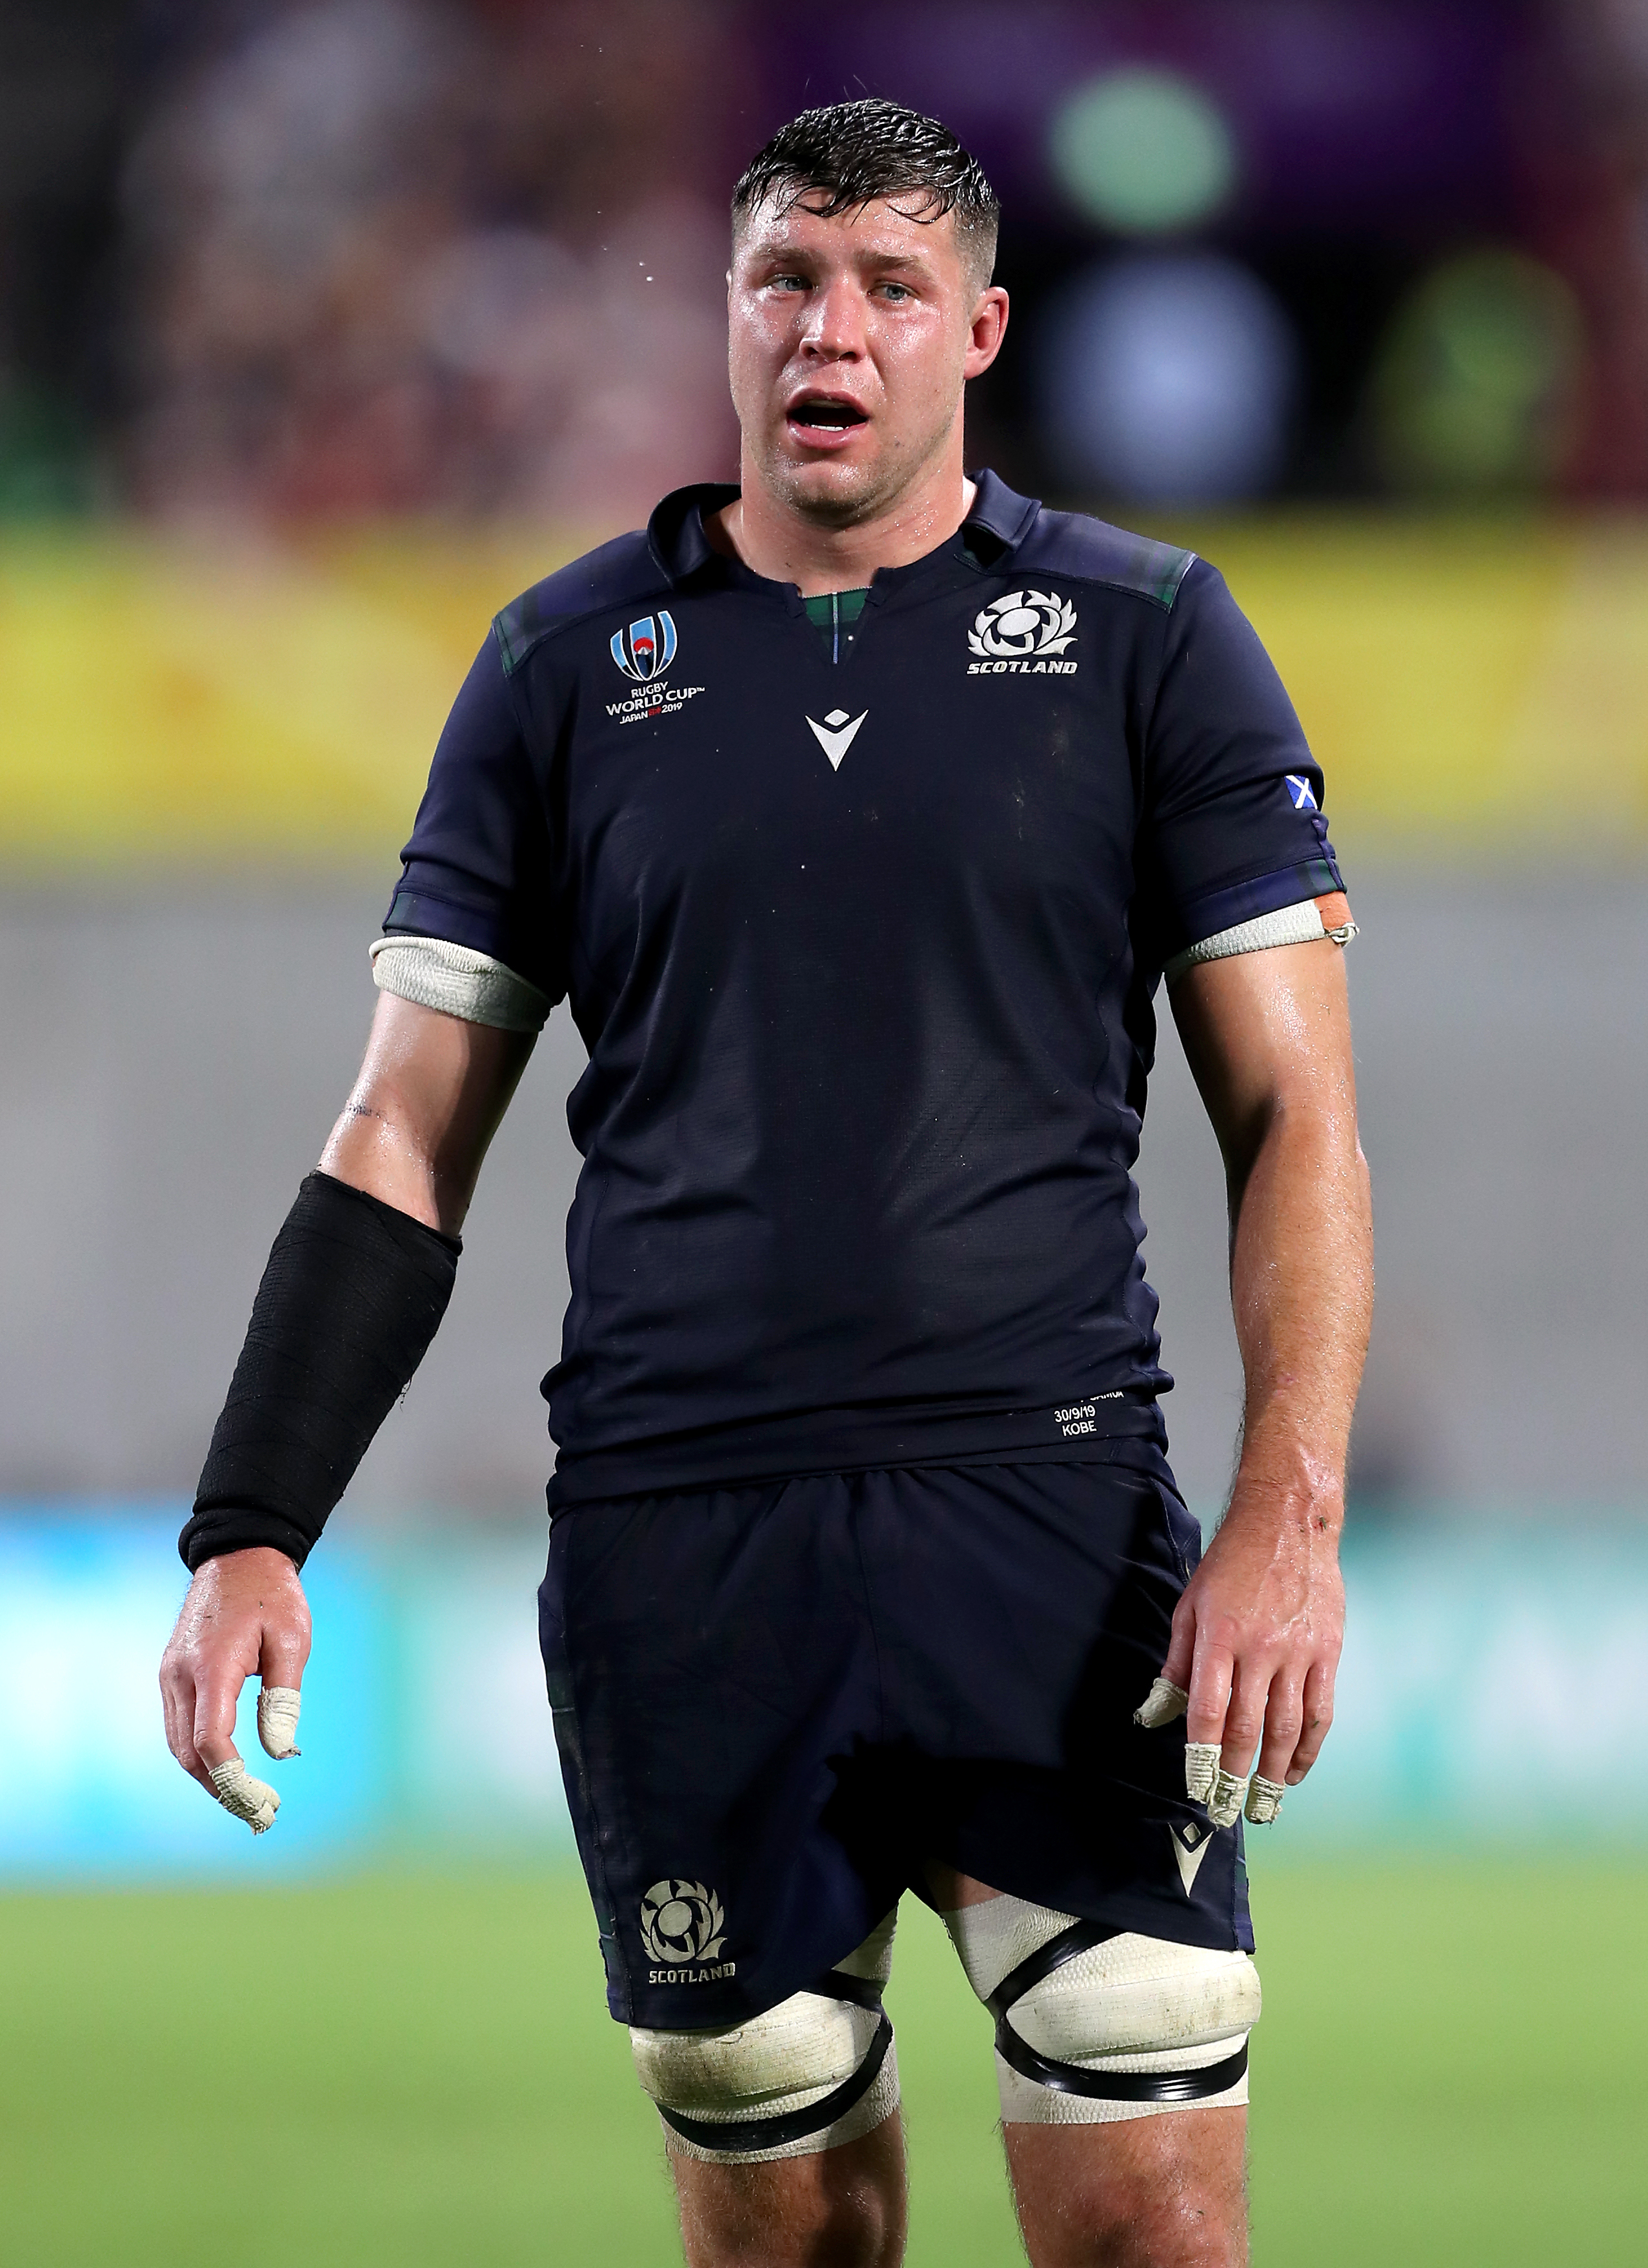 Grant Gilchrist during the 2019 Rugby World Cup